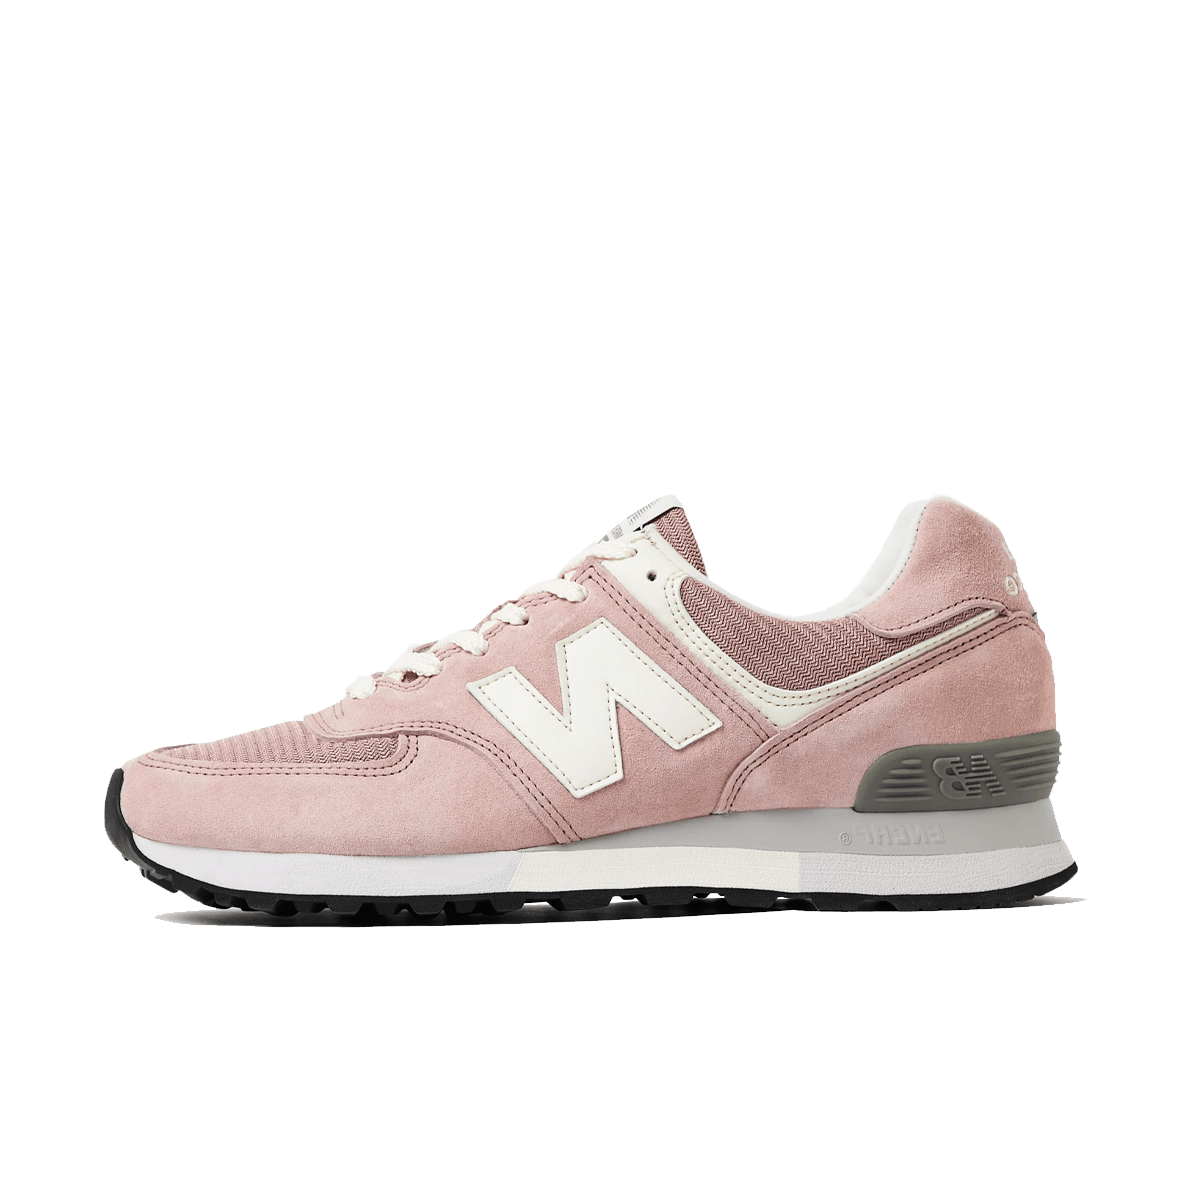 New Balance 576 'Pale Mauve' - Made in UK